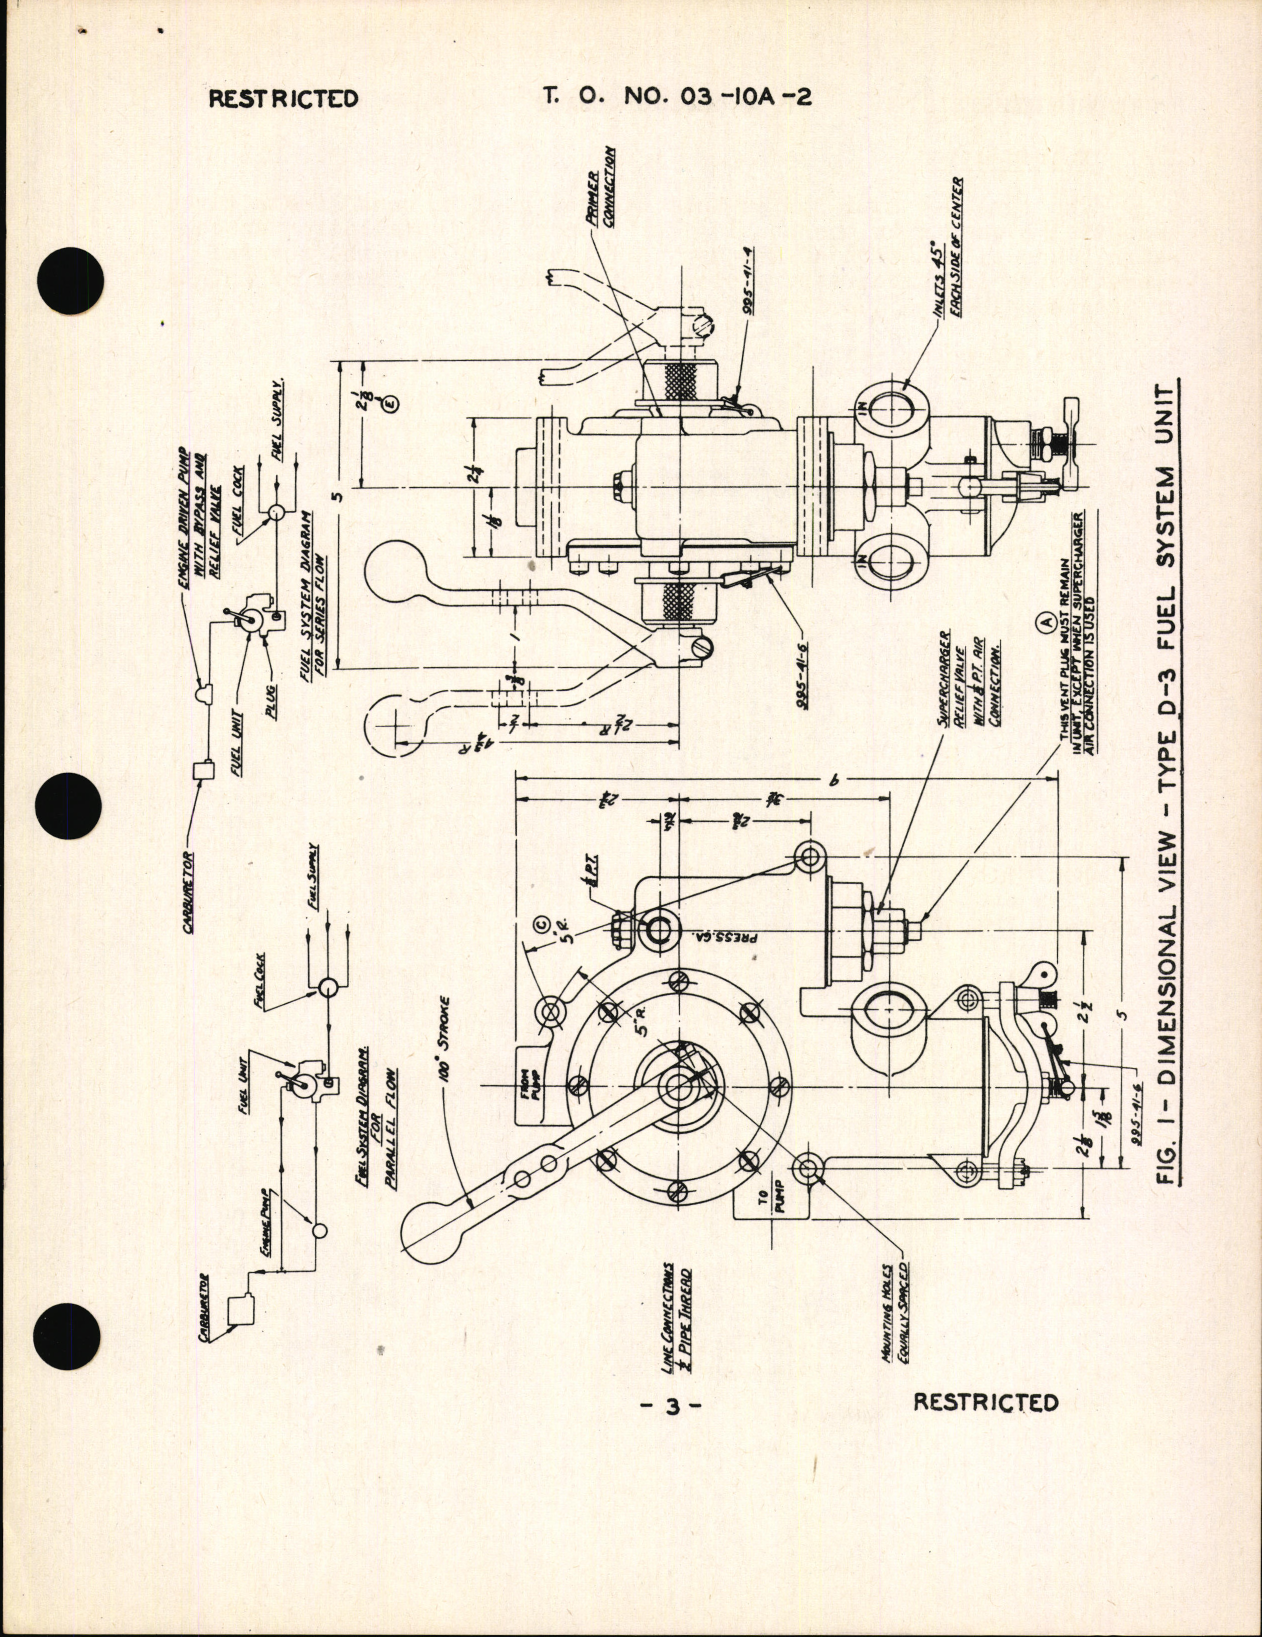 Sample page 5 from AirCorps Library document: Handbook of Instructions with Parts Catalog for Type D-3 Fuel System Unit